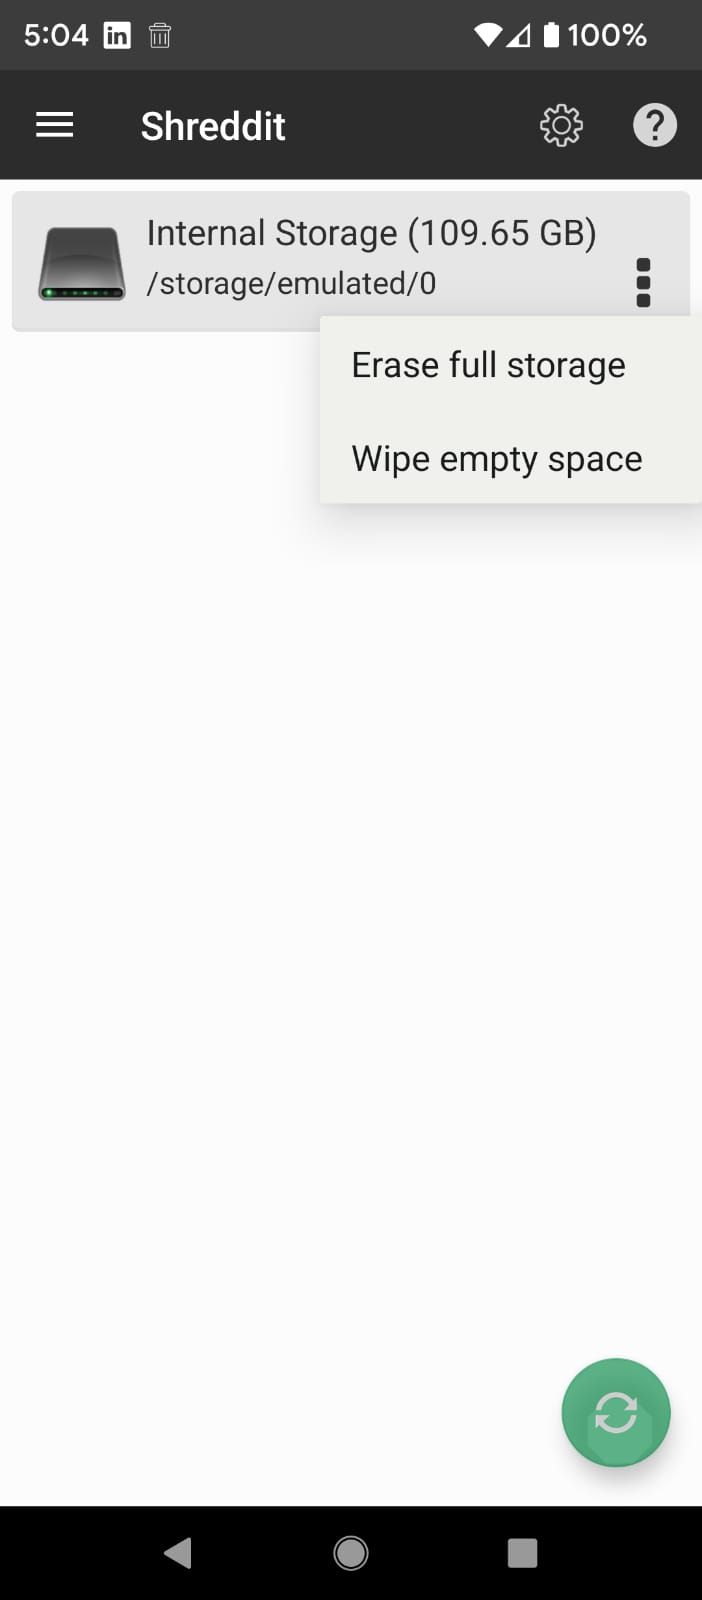 Wipe empty space option in the Shreddit app for Android